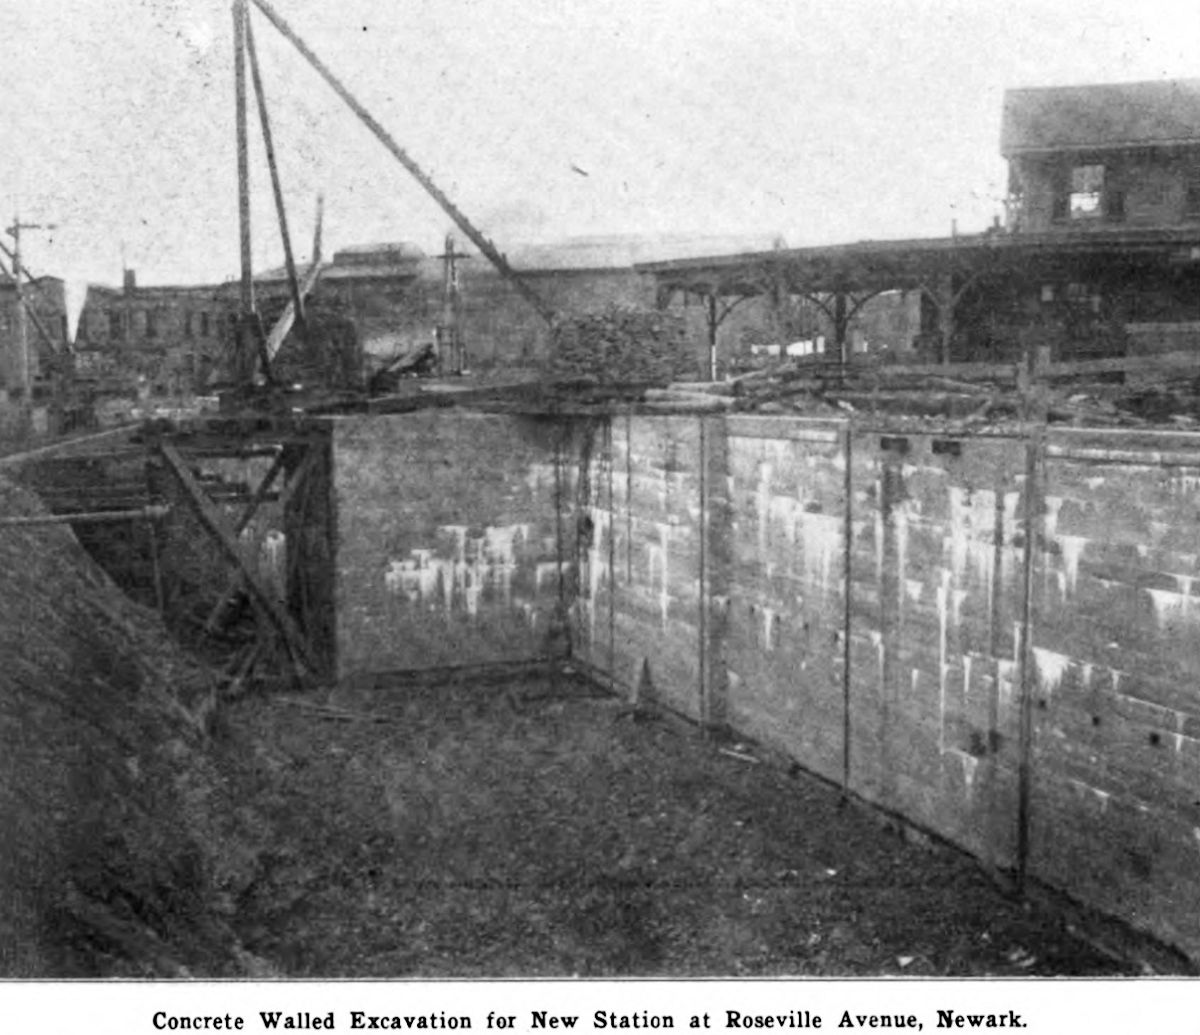 Roseville Avenue Station
Photo from the Railroad Gazette
